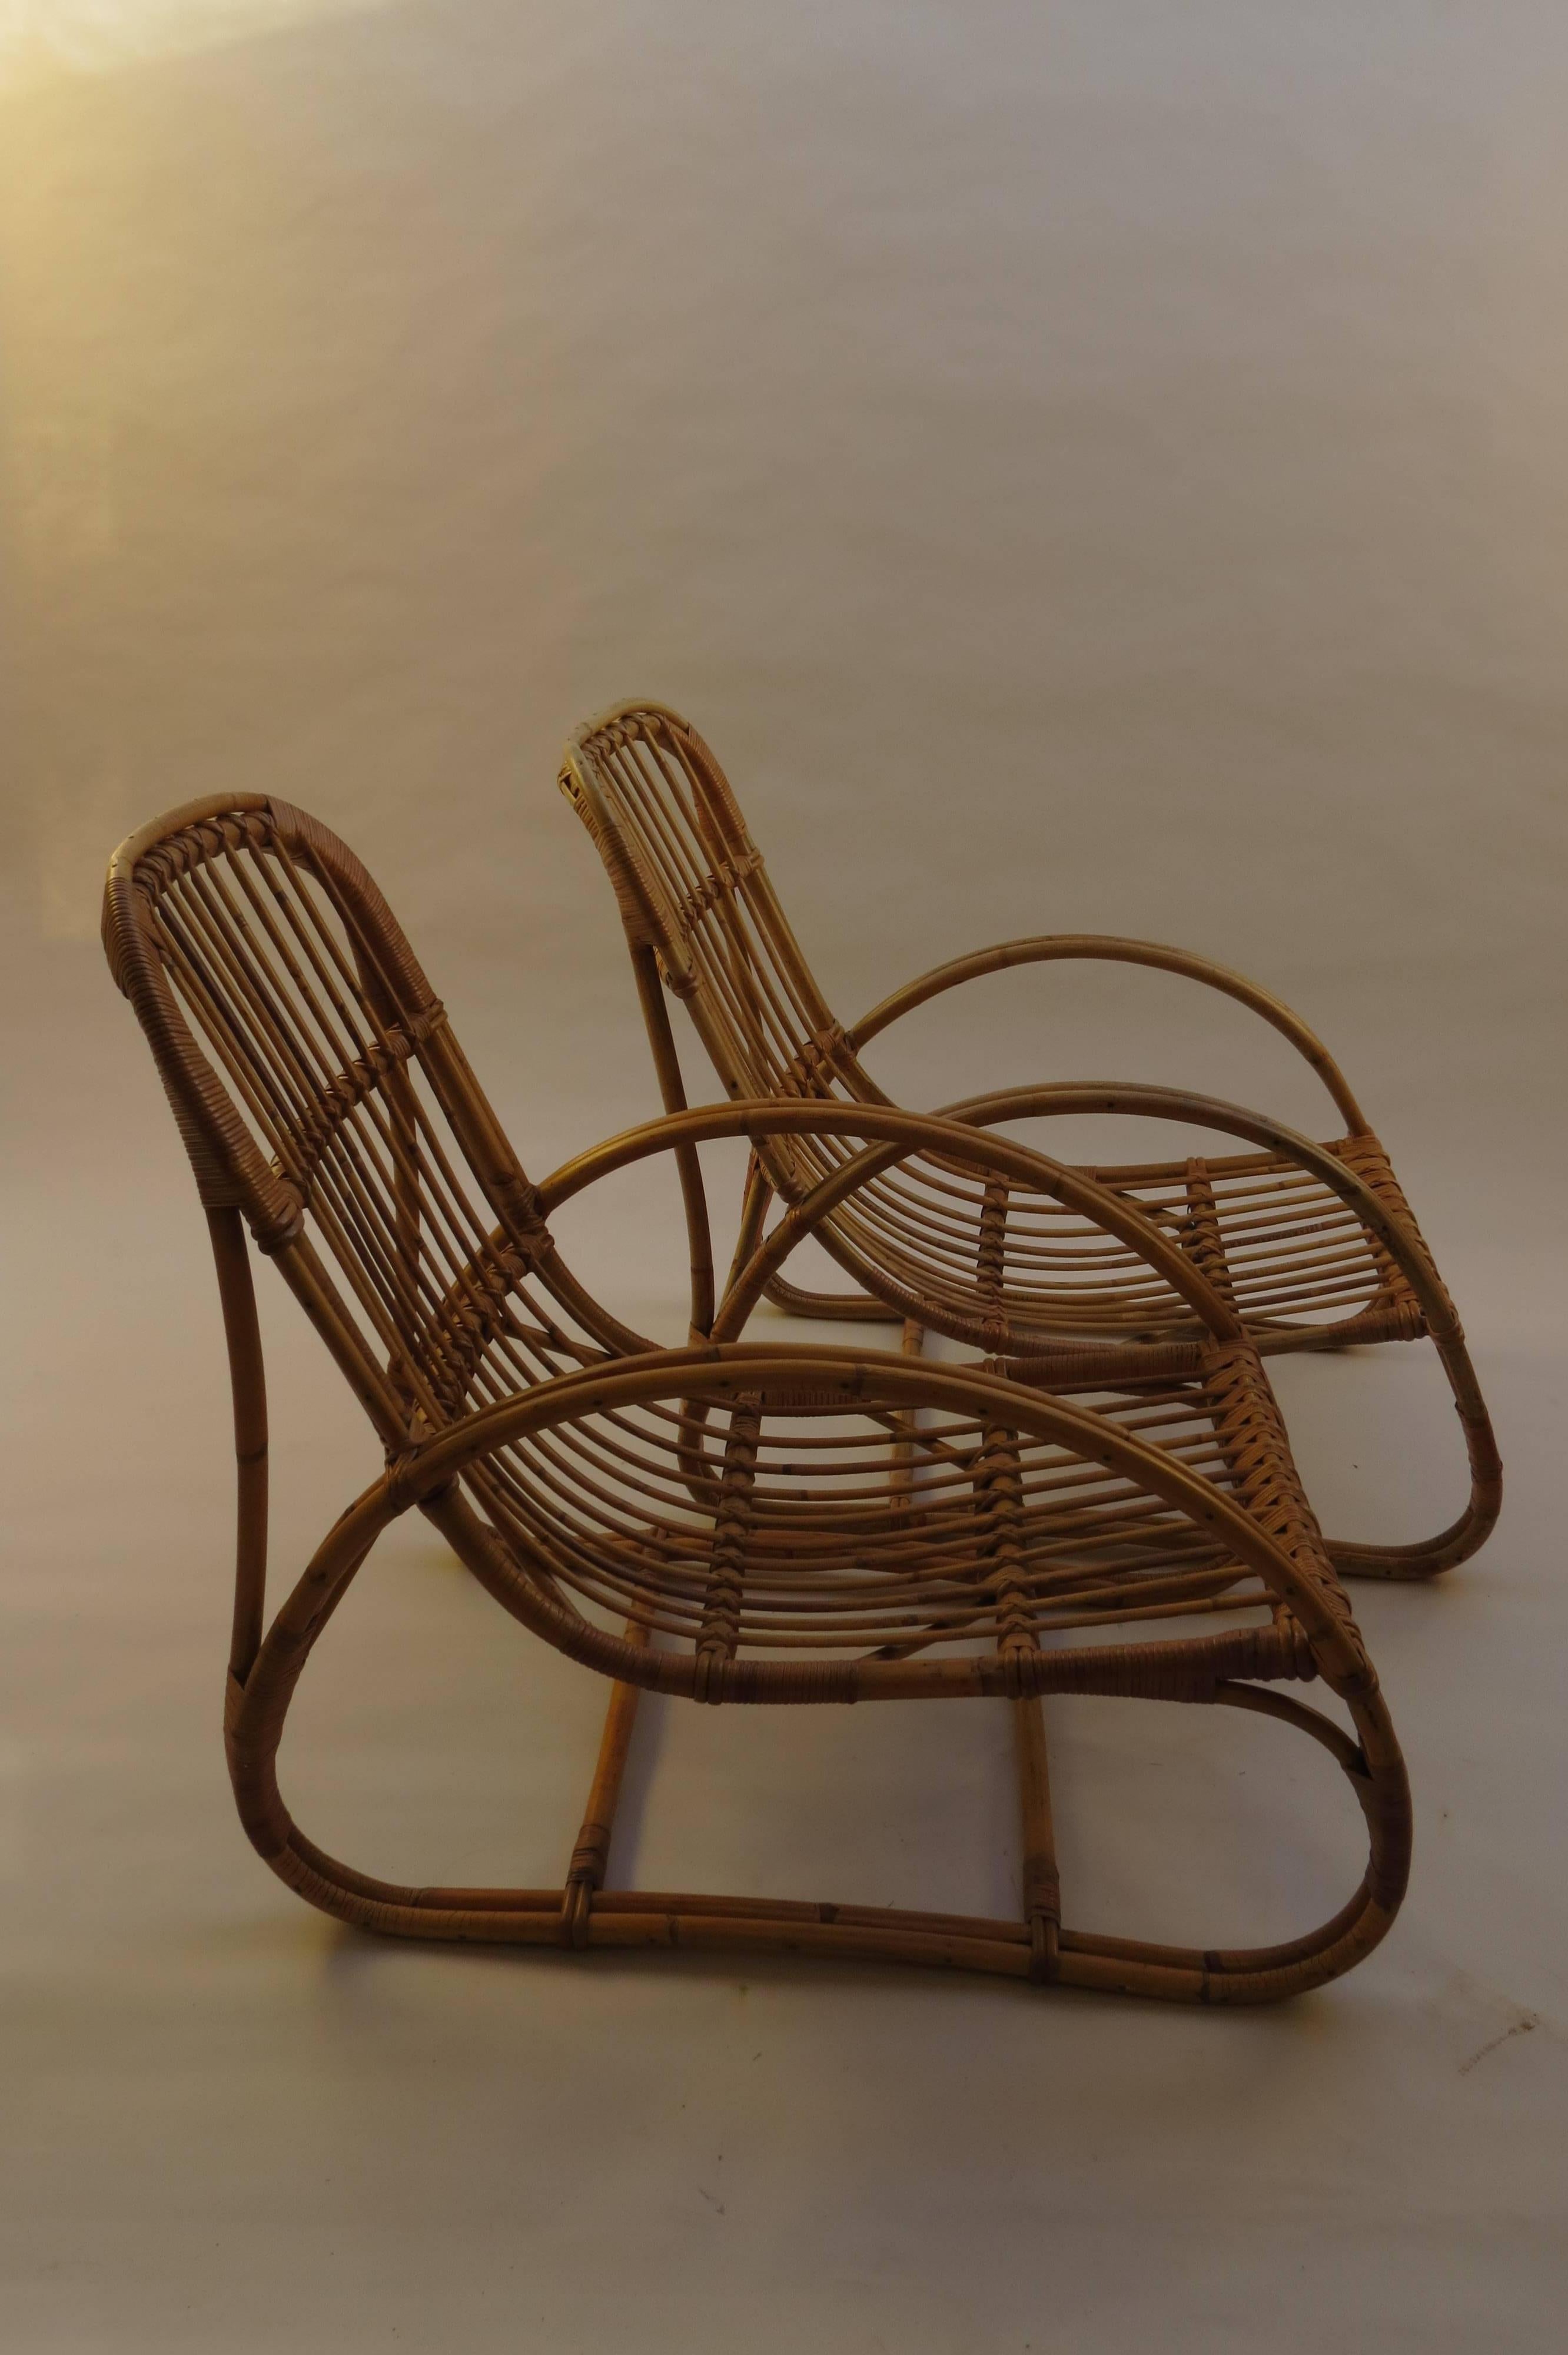 Rustic 1960s Cane Lounge Chair and Footstool by Dryad and Angraves